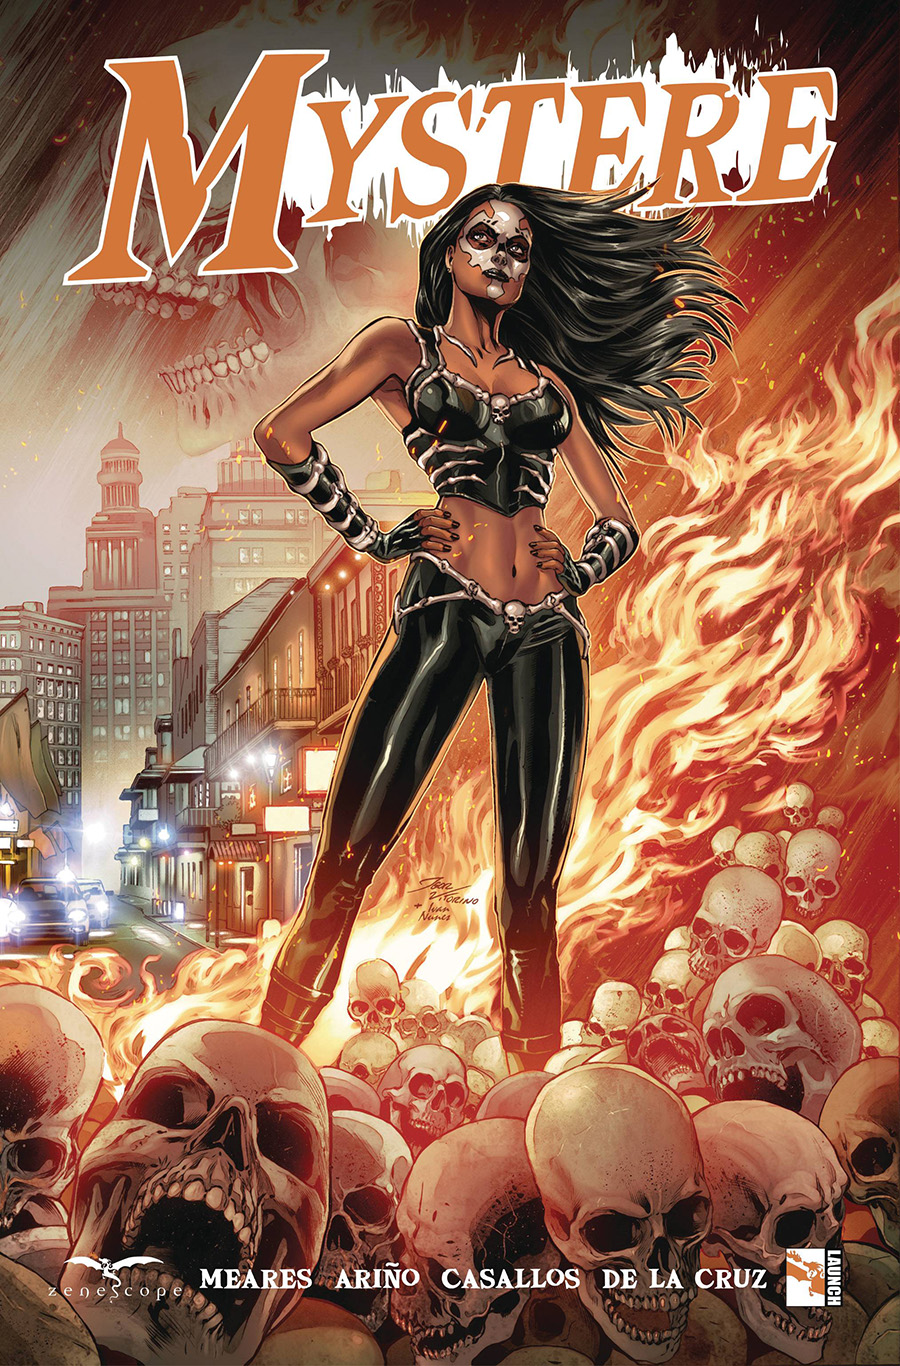 Grimm Fairy Tales Presents Mystere TP